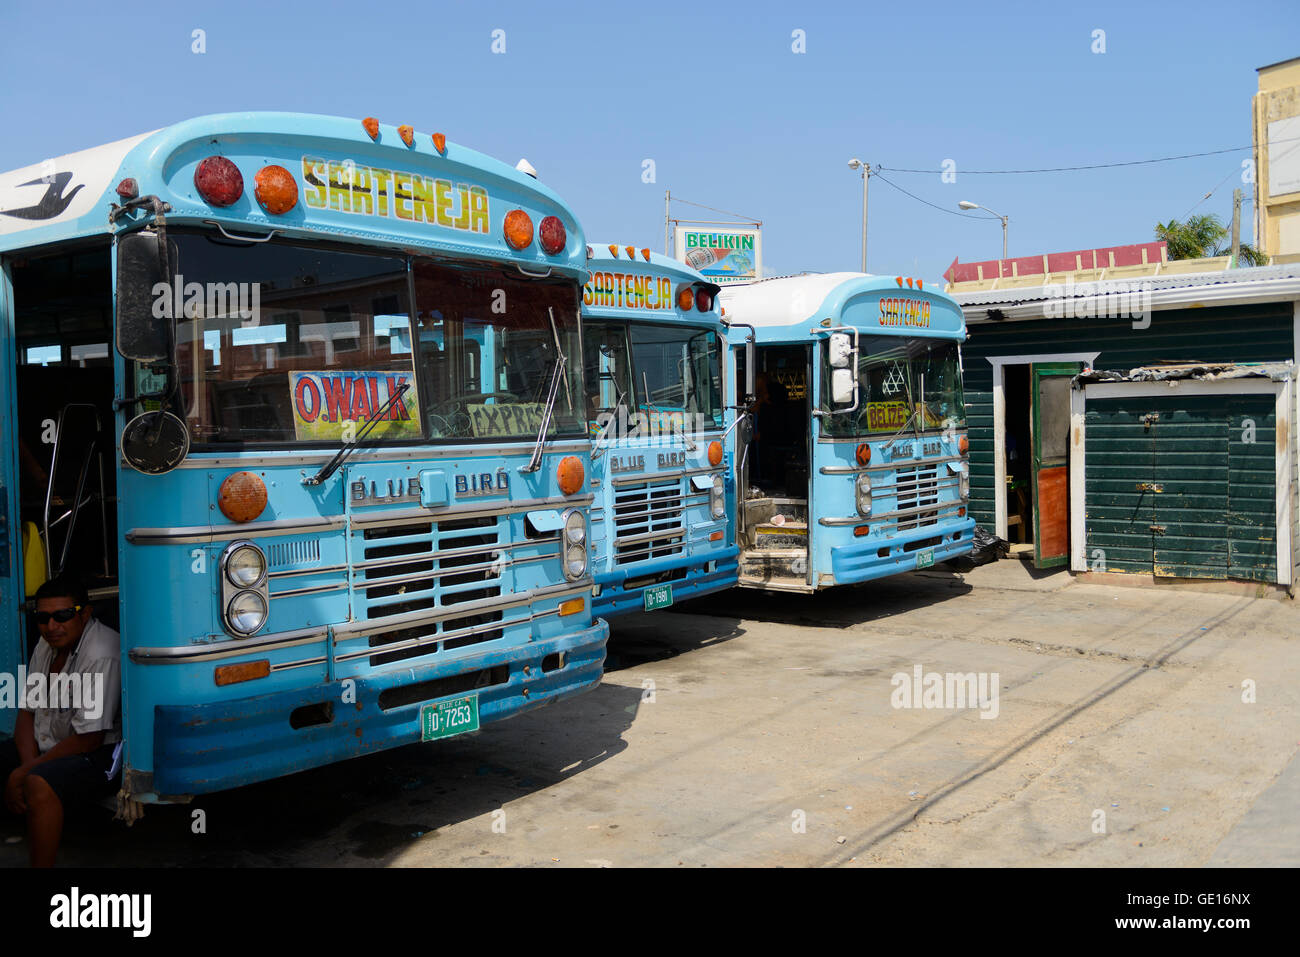 Belize City, Belize - July 14, 2016: Old Blue Bird buses still in service at a bus terminal in Belize City. Stock Photo